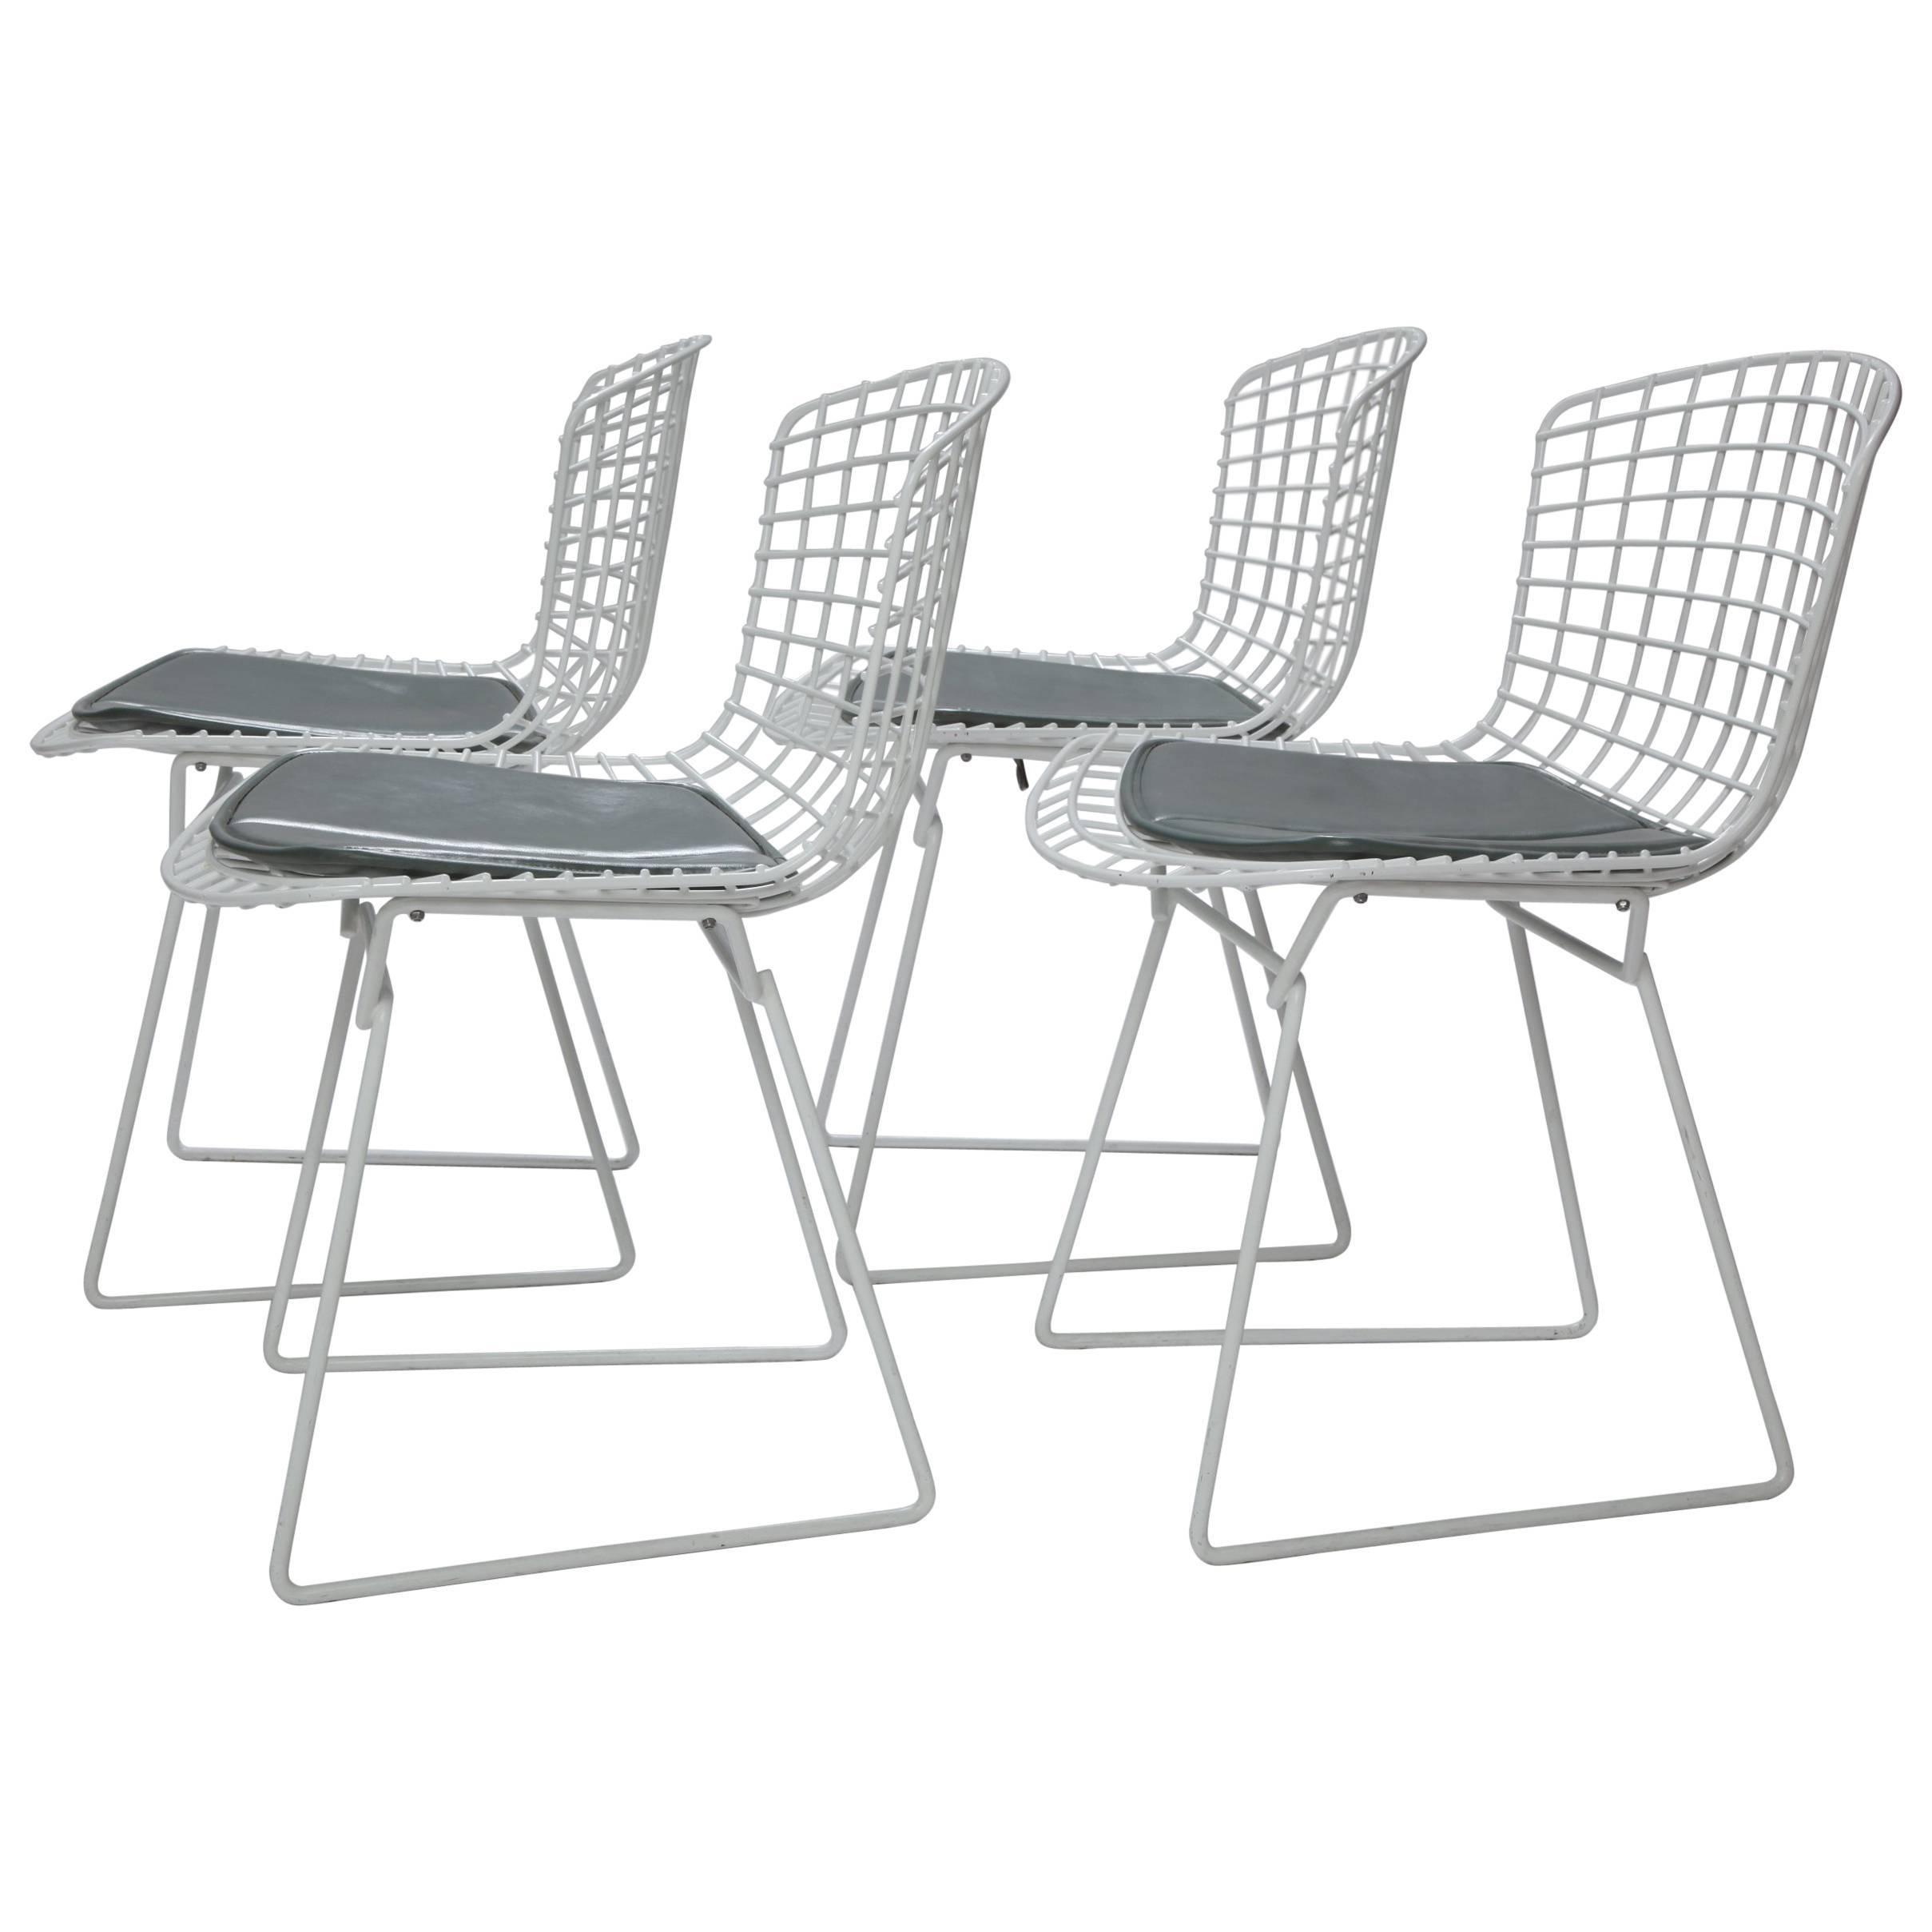 Four Harry Bertoia for Knoll Wire Chairs with Original Seat Pads, USA, 1960s